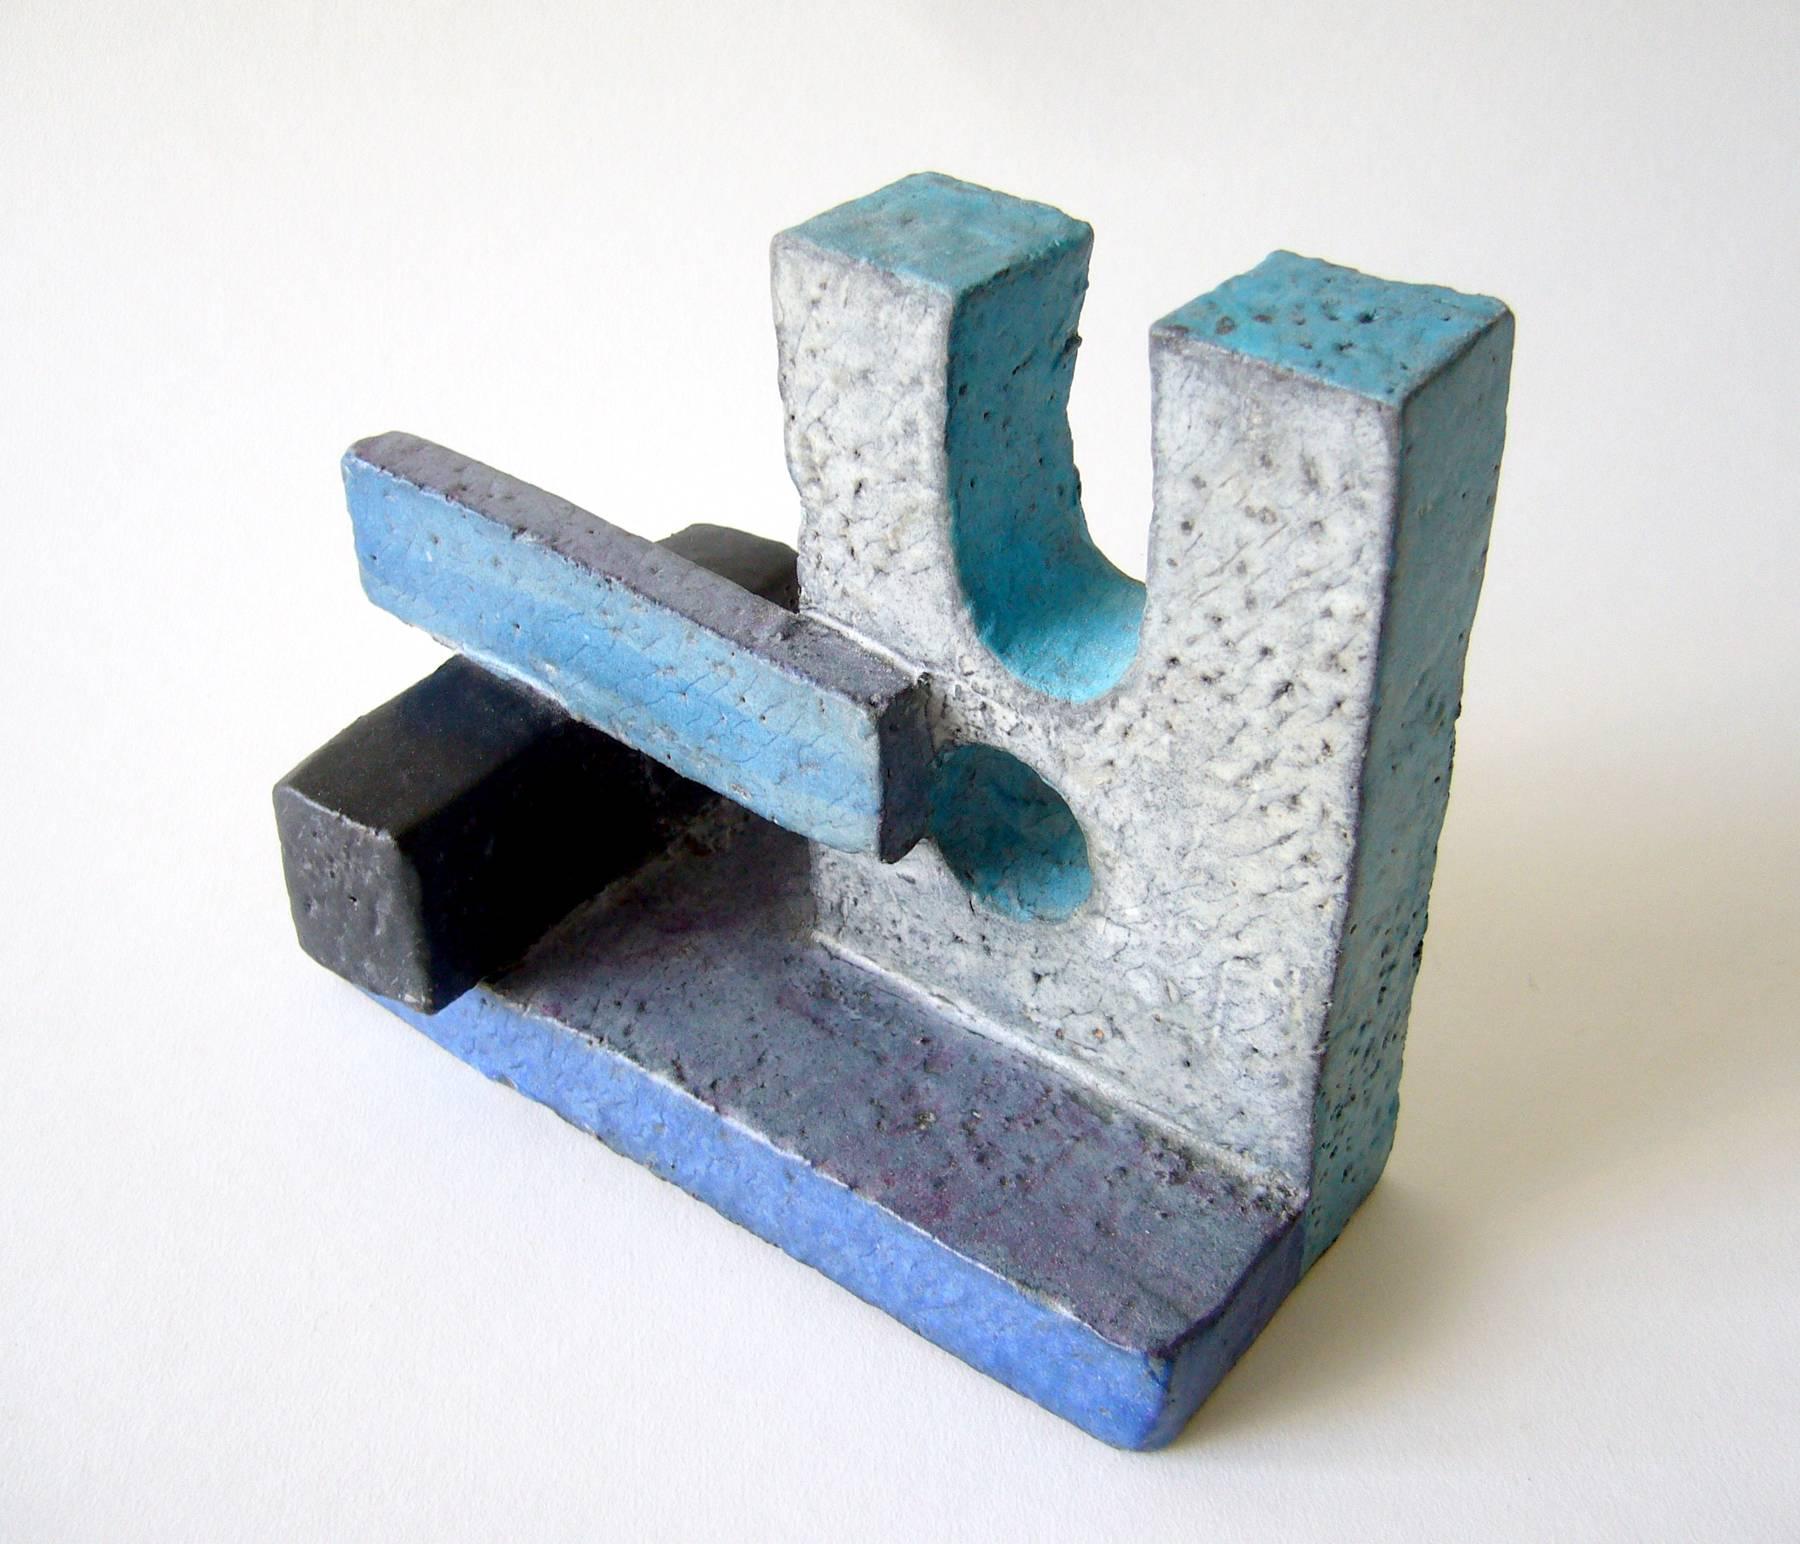 Geometric Italian modernist ceramic sculpture with features shades of blue and grey. Piece stands 5.5